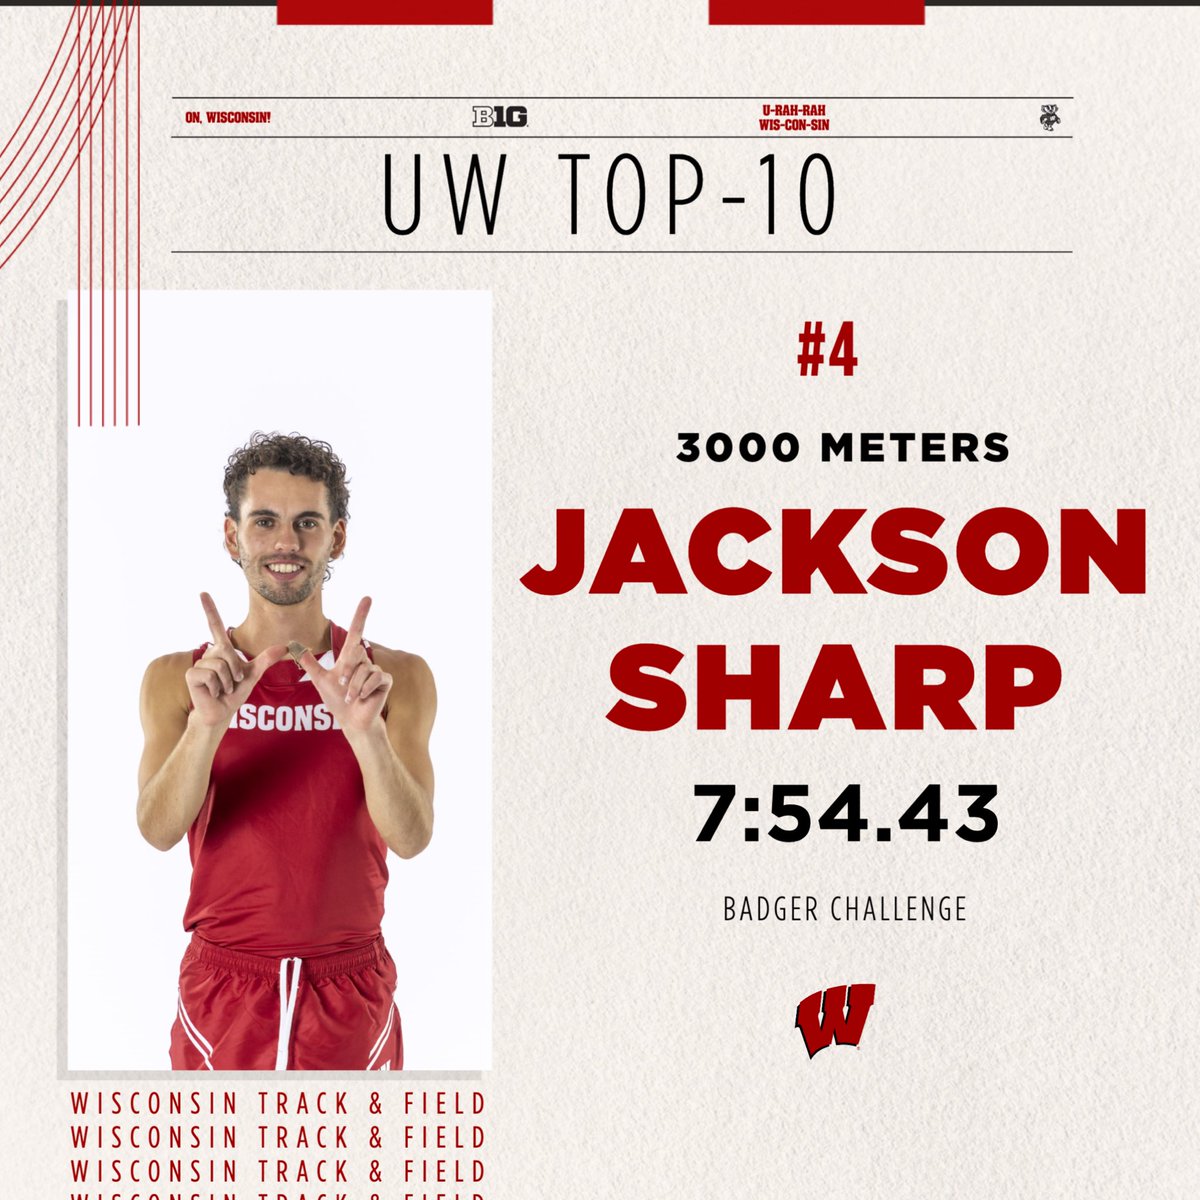 𝘼𝙘𝙩𝙞𝙤𝙣 𝙅𝙖𝙘𝙠𝙨𝙤𝙣 🎬 Jackson Sharp earns No. 4 on the UW top 10 list in the 3000 meters! He won the race at today’s Badger Challenge in 7:54.43 #OnWisconsin || #Badgers